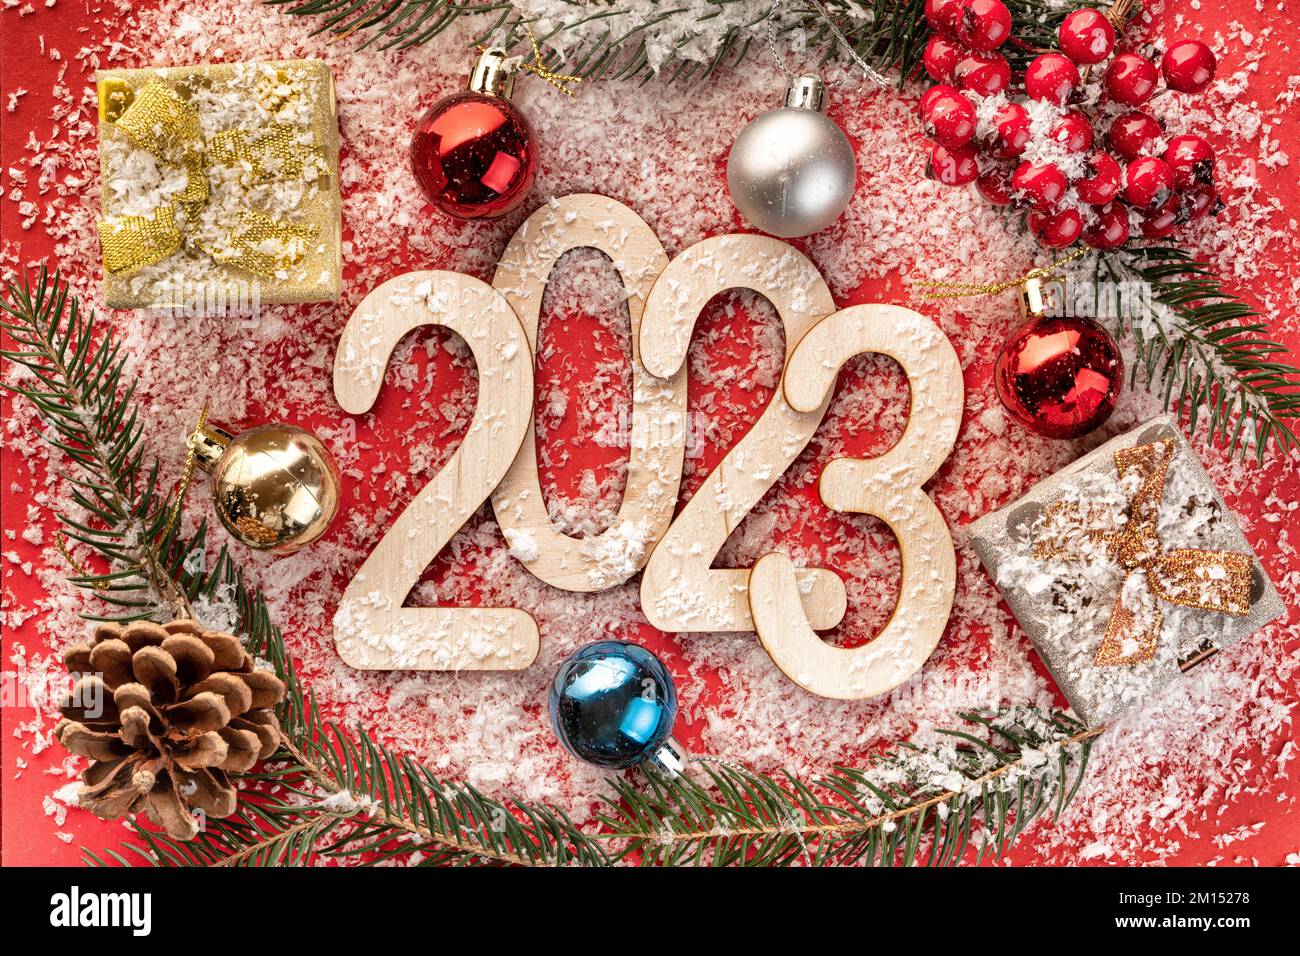 New Year's number 2023 made of wooden numbers on red paper with Christmas balls, gift boxes, fir branches Stock Photo